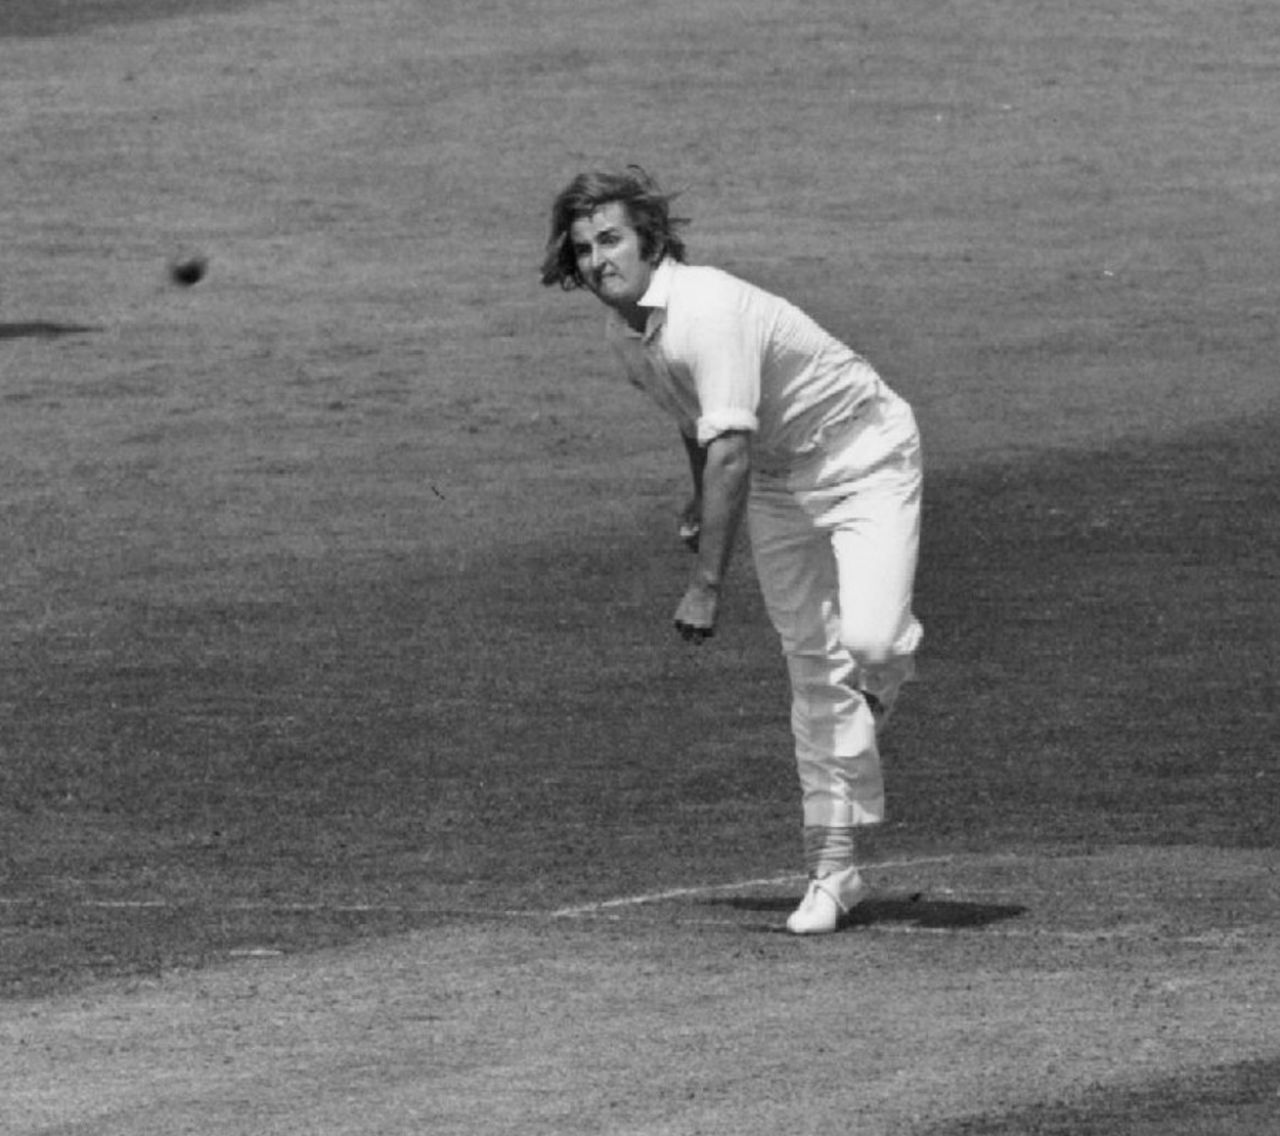 Gary Gilmour releases the ball, Australia v West Indies, World Cup final, Lord's, June 21, 1975